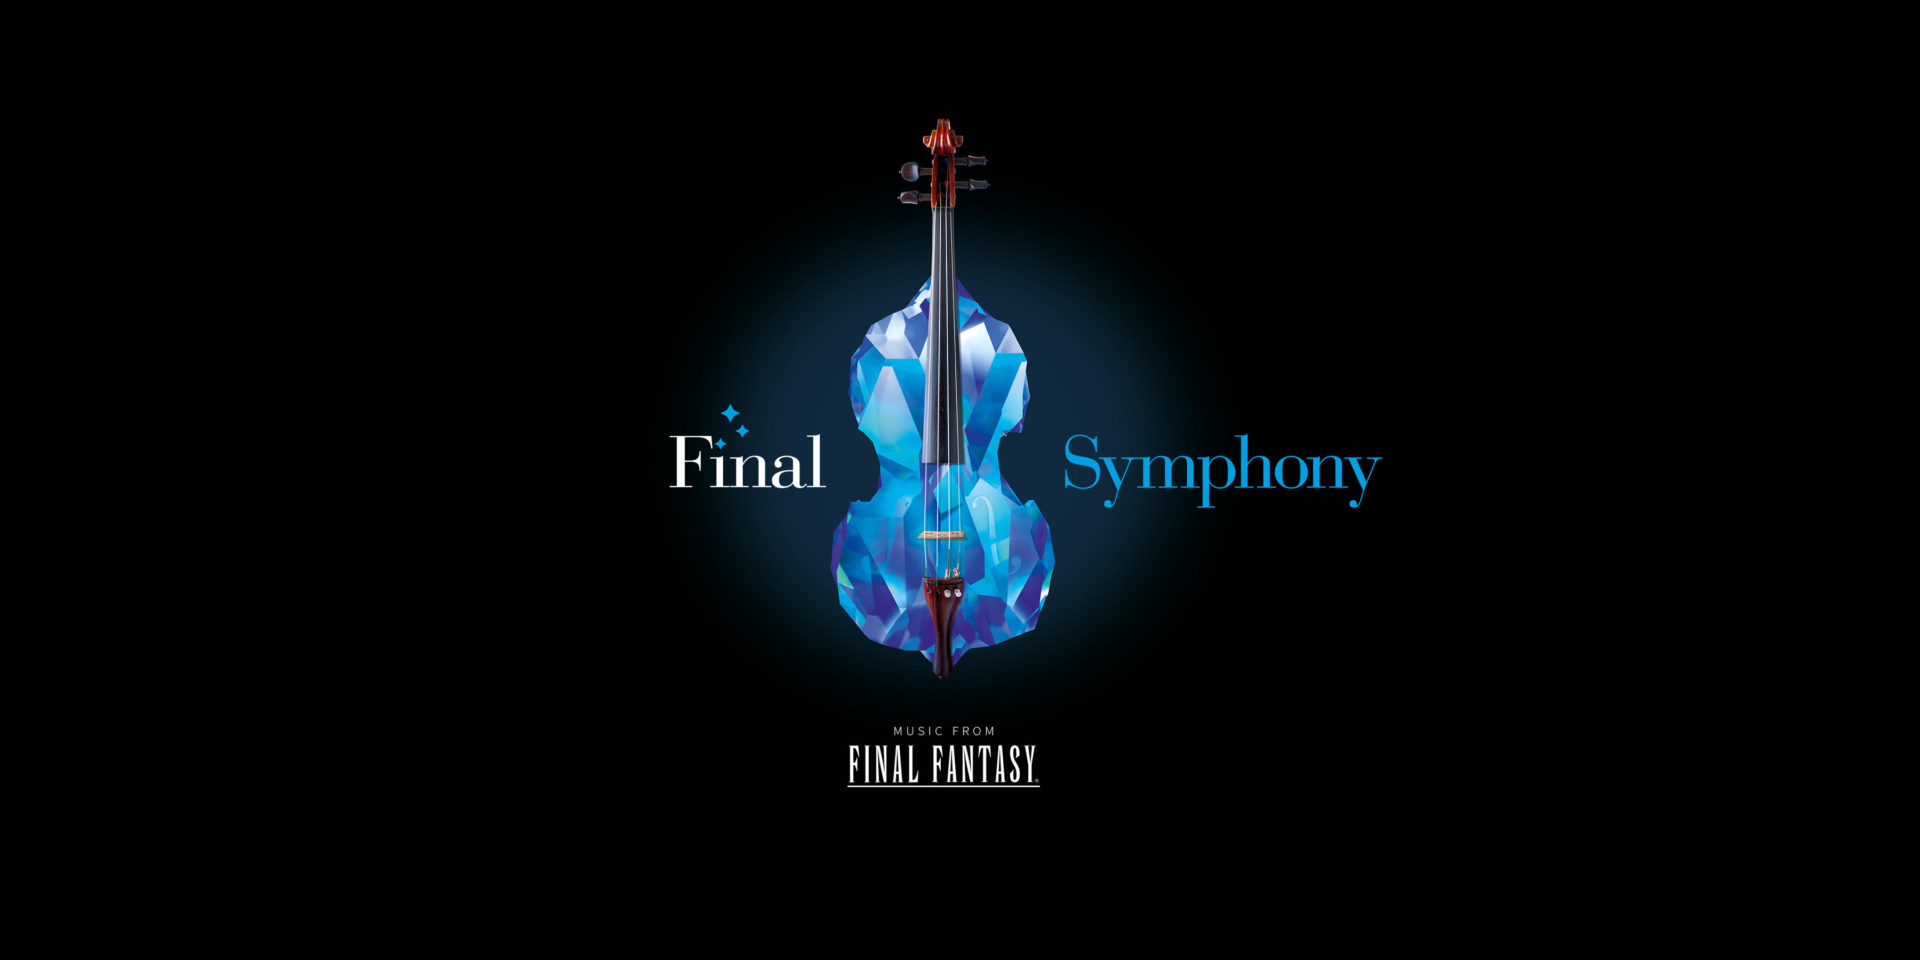 RSNO to perform music of FINAL FANTASY® live in concert